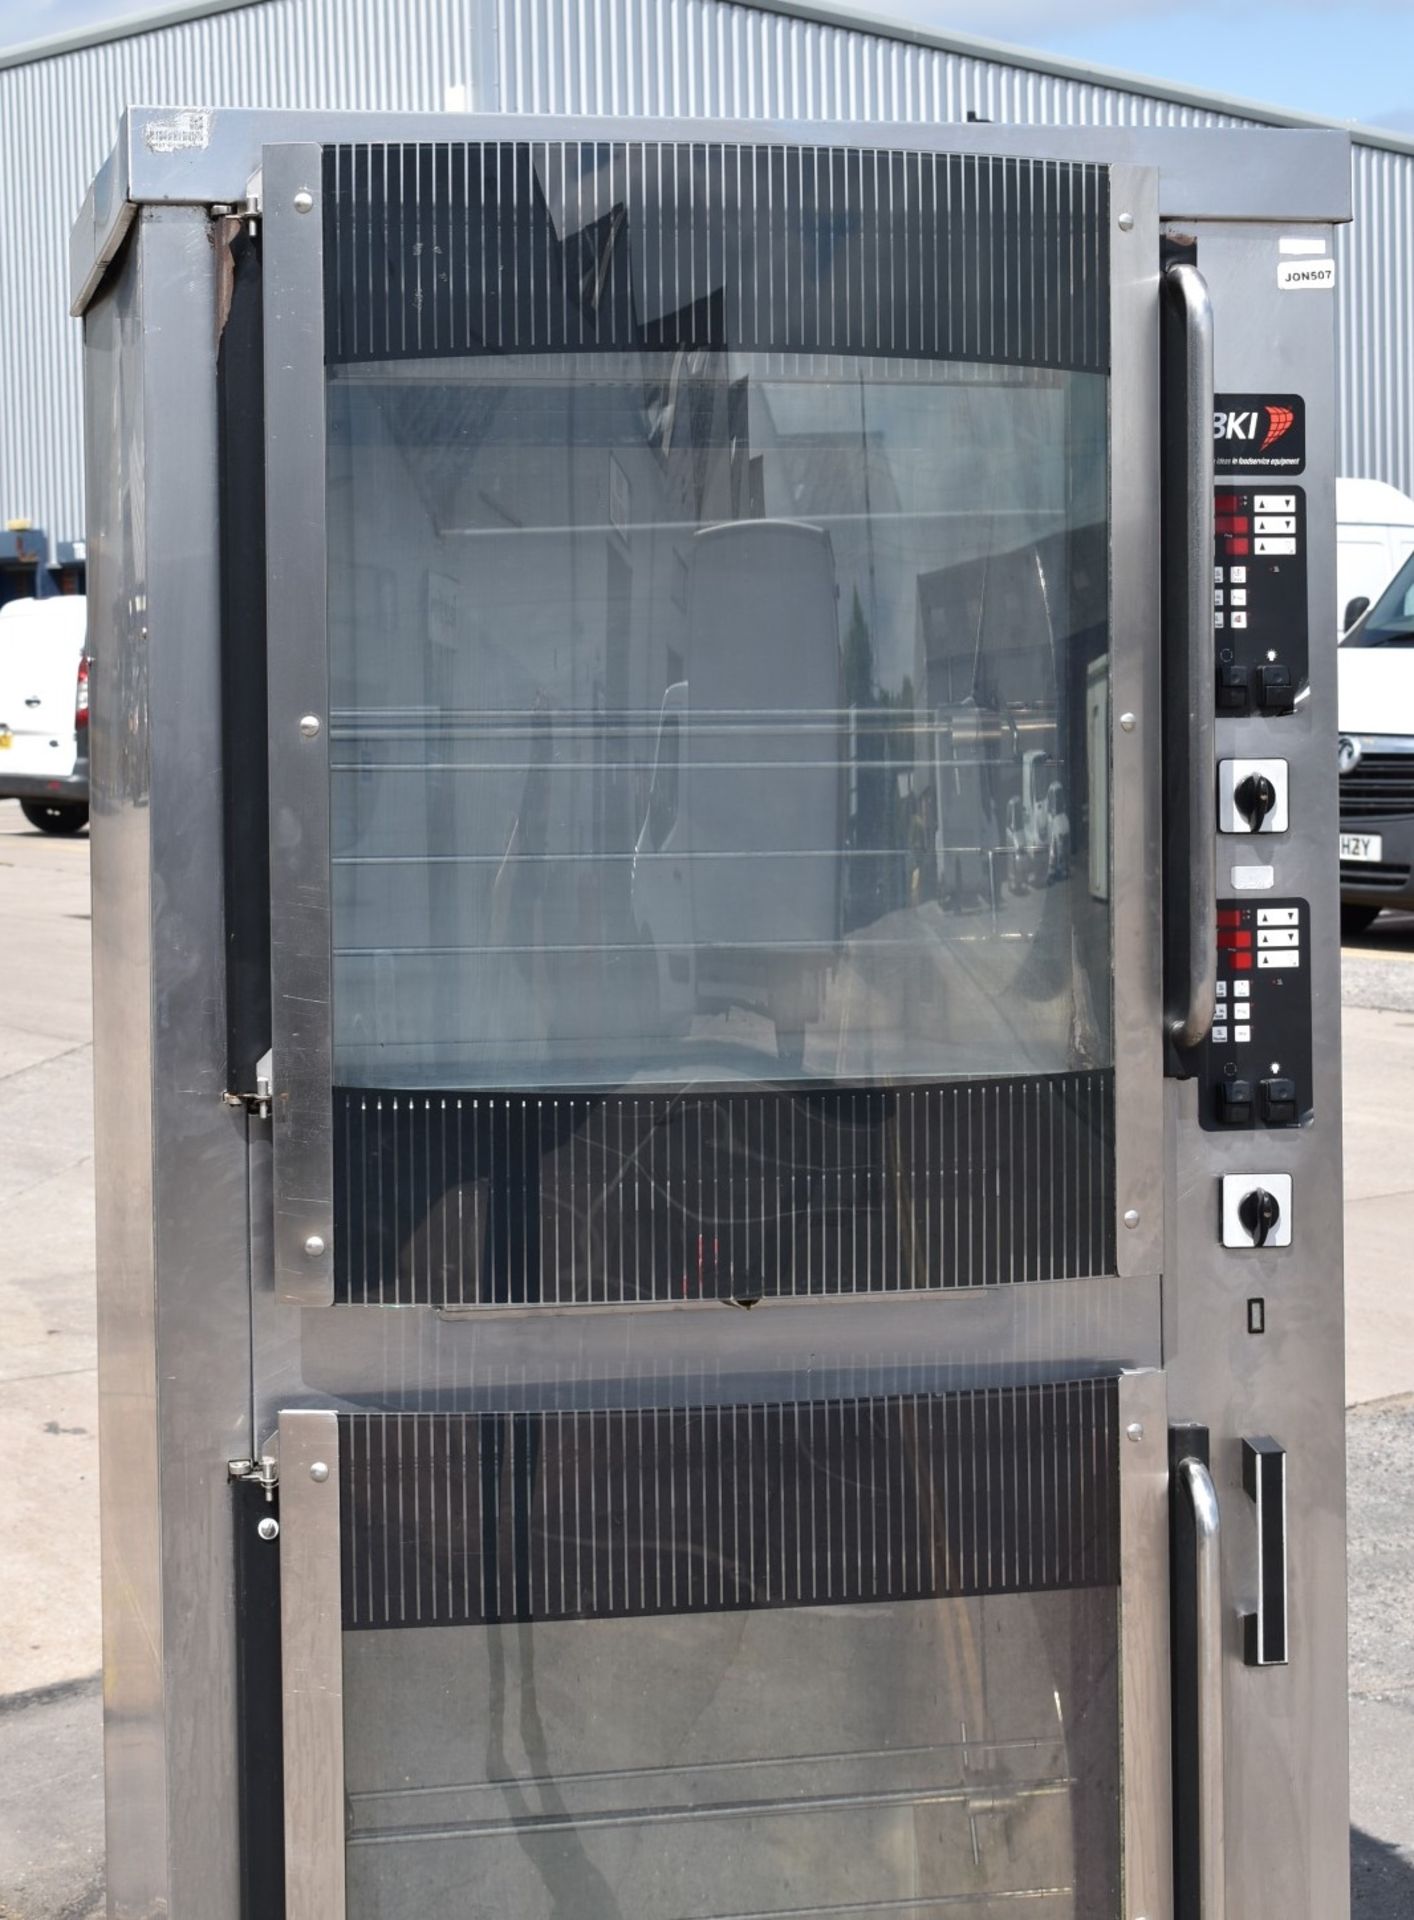 1 x BKI BBQ King Commercial Double Rotisserie Chicken Oven With Stand - Type VGUK16 - 3 Phase - Image 19 of 21